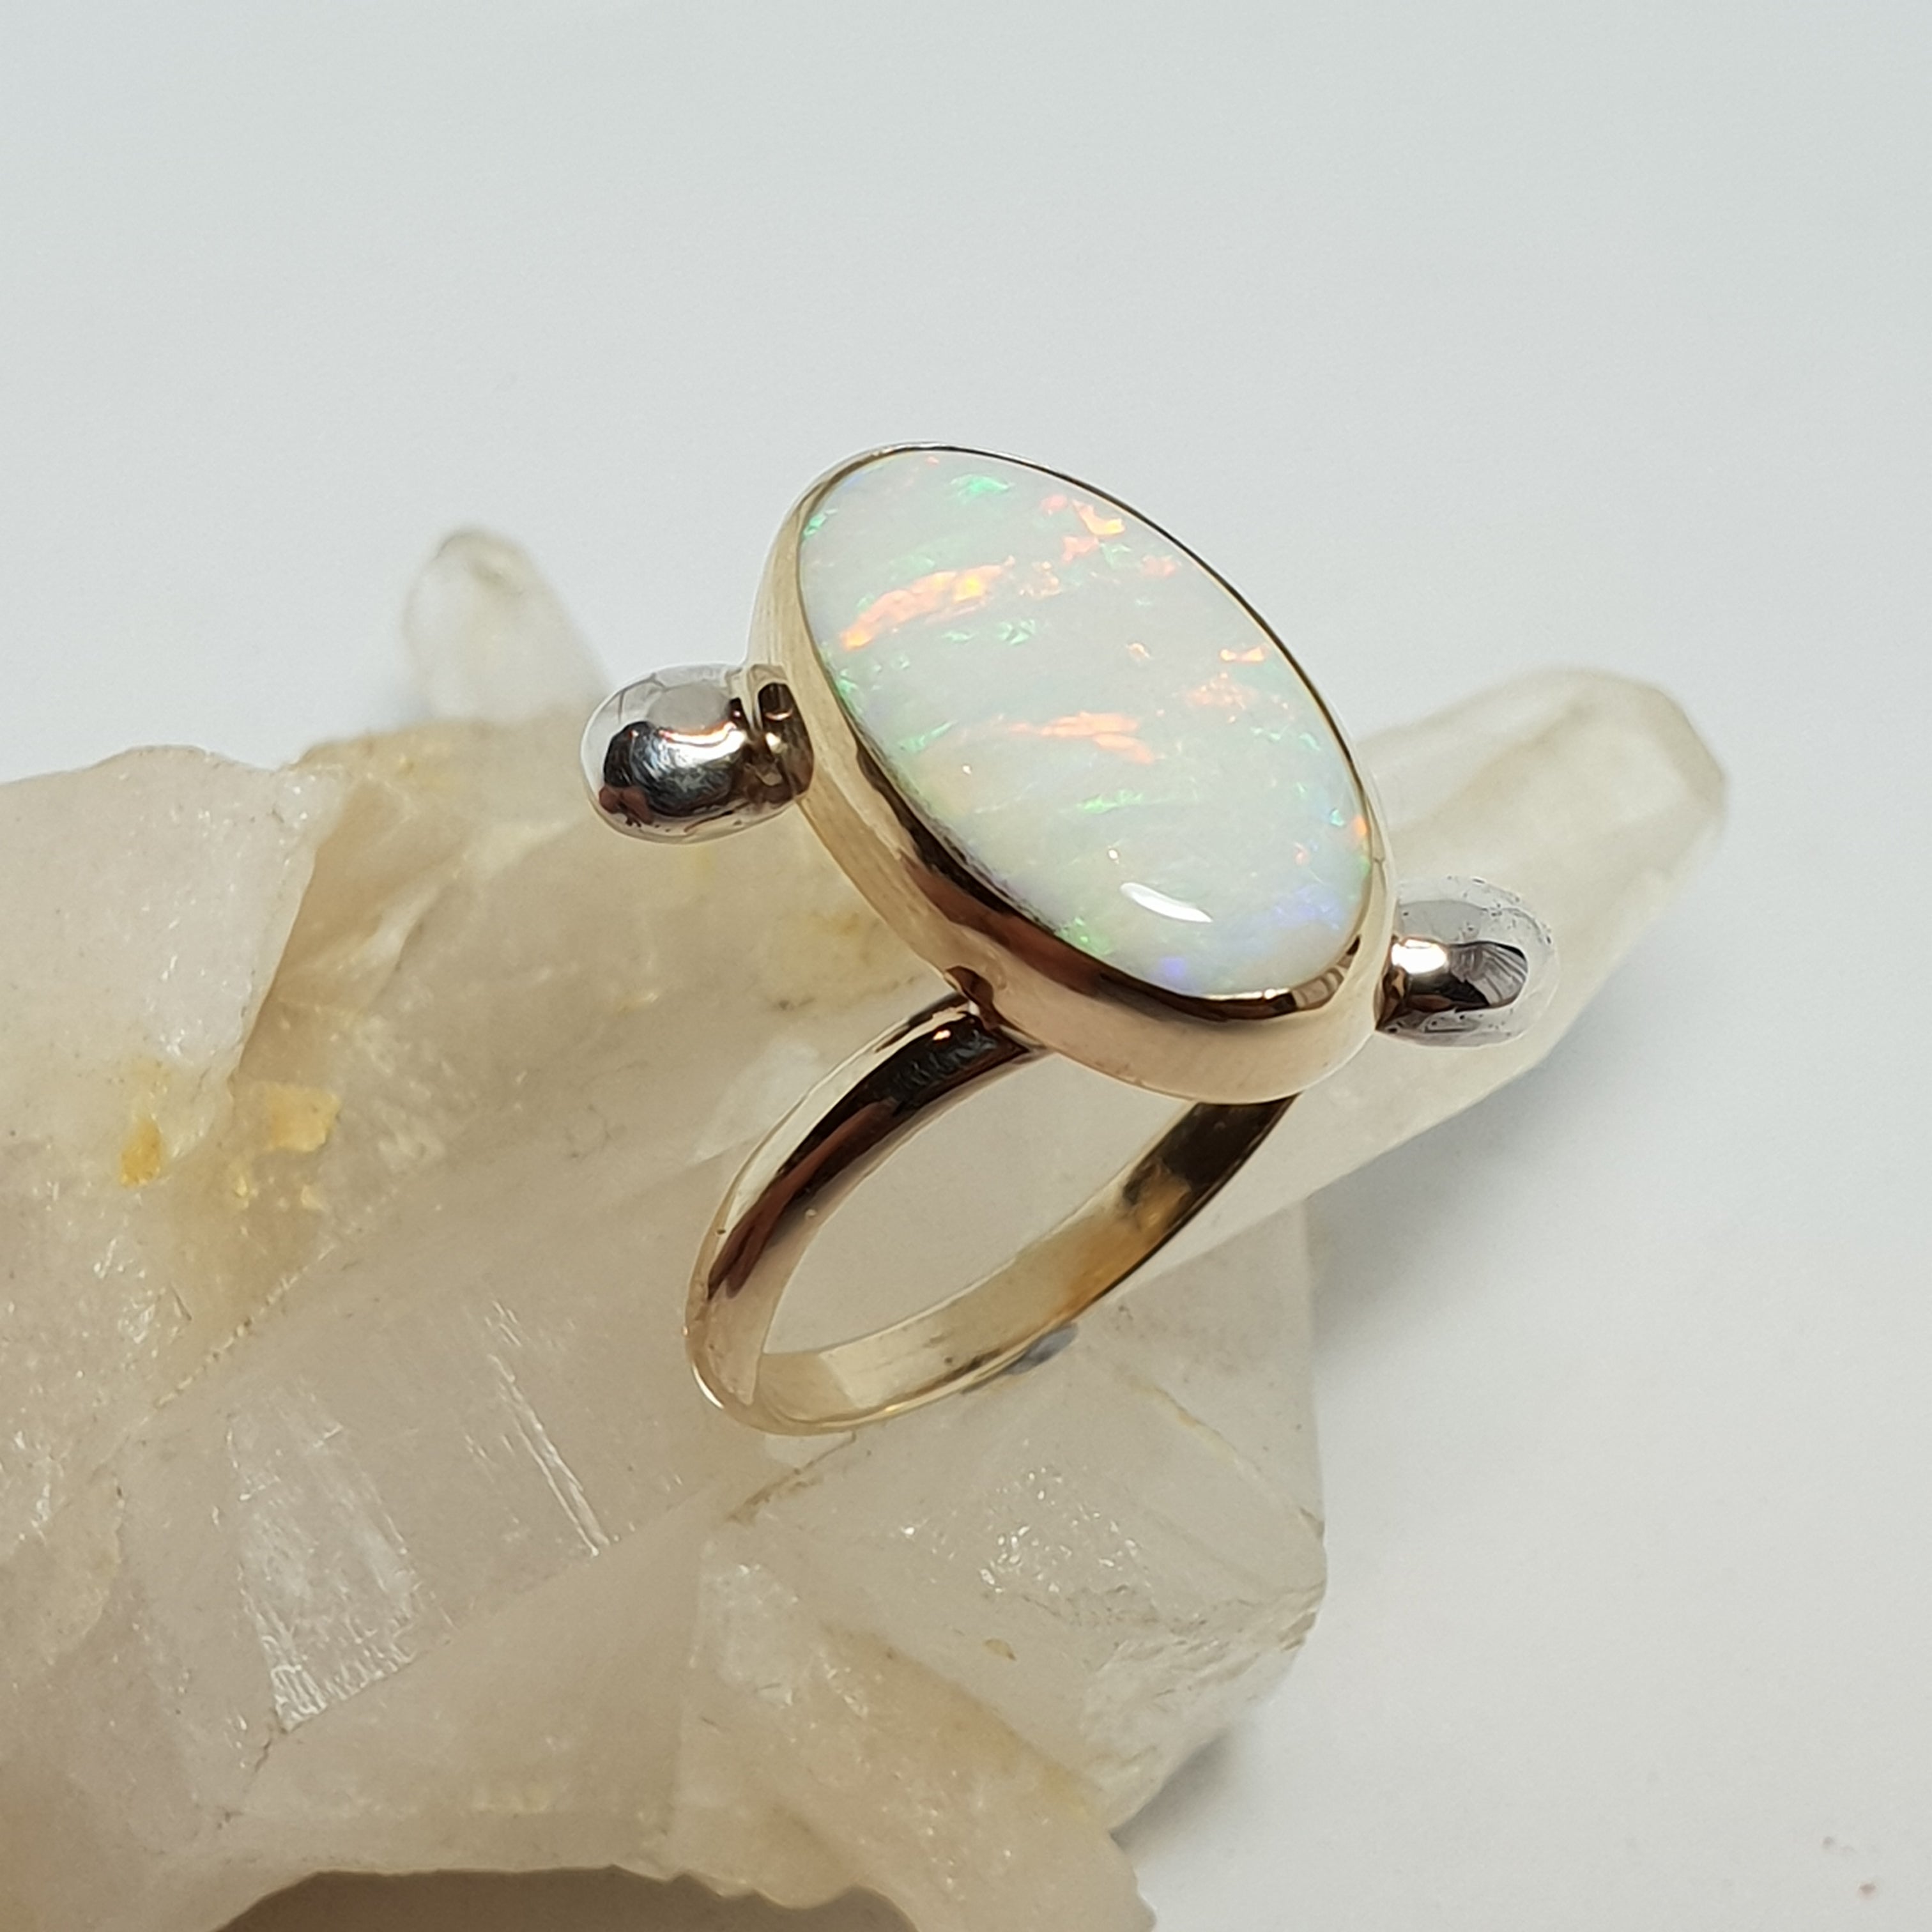 Tiger stripes Coober Pedy Crystal Opal Ring 045X1